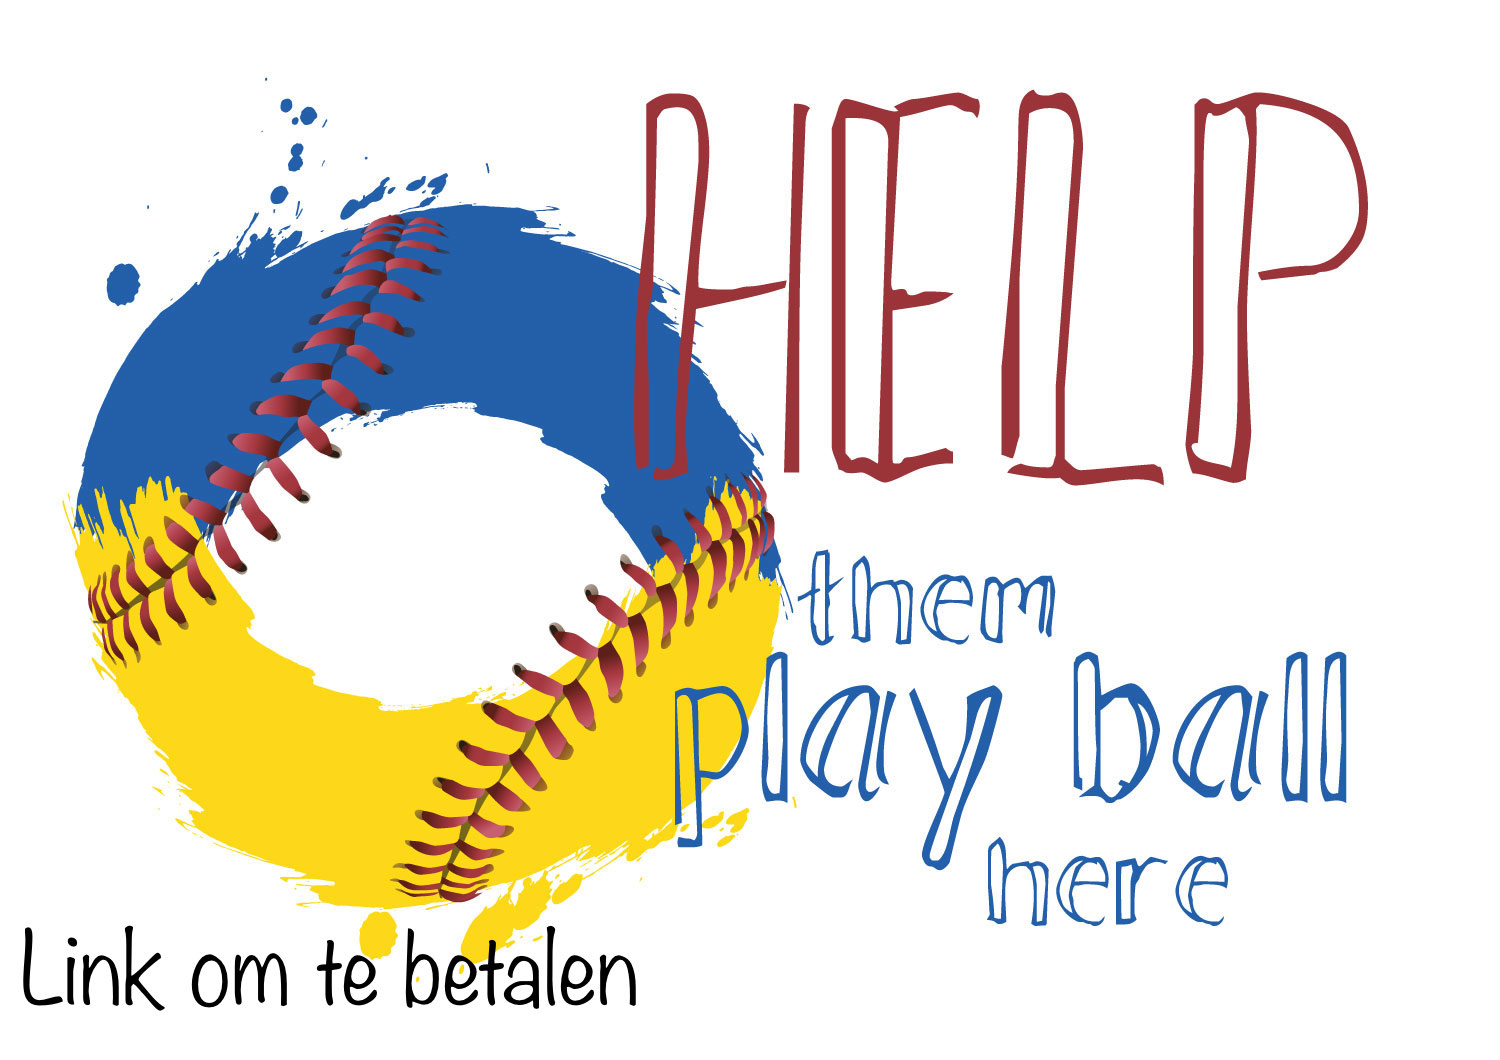 Help them play ball here